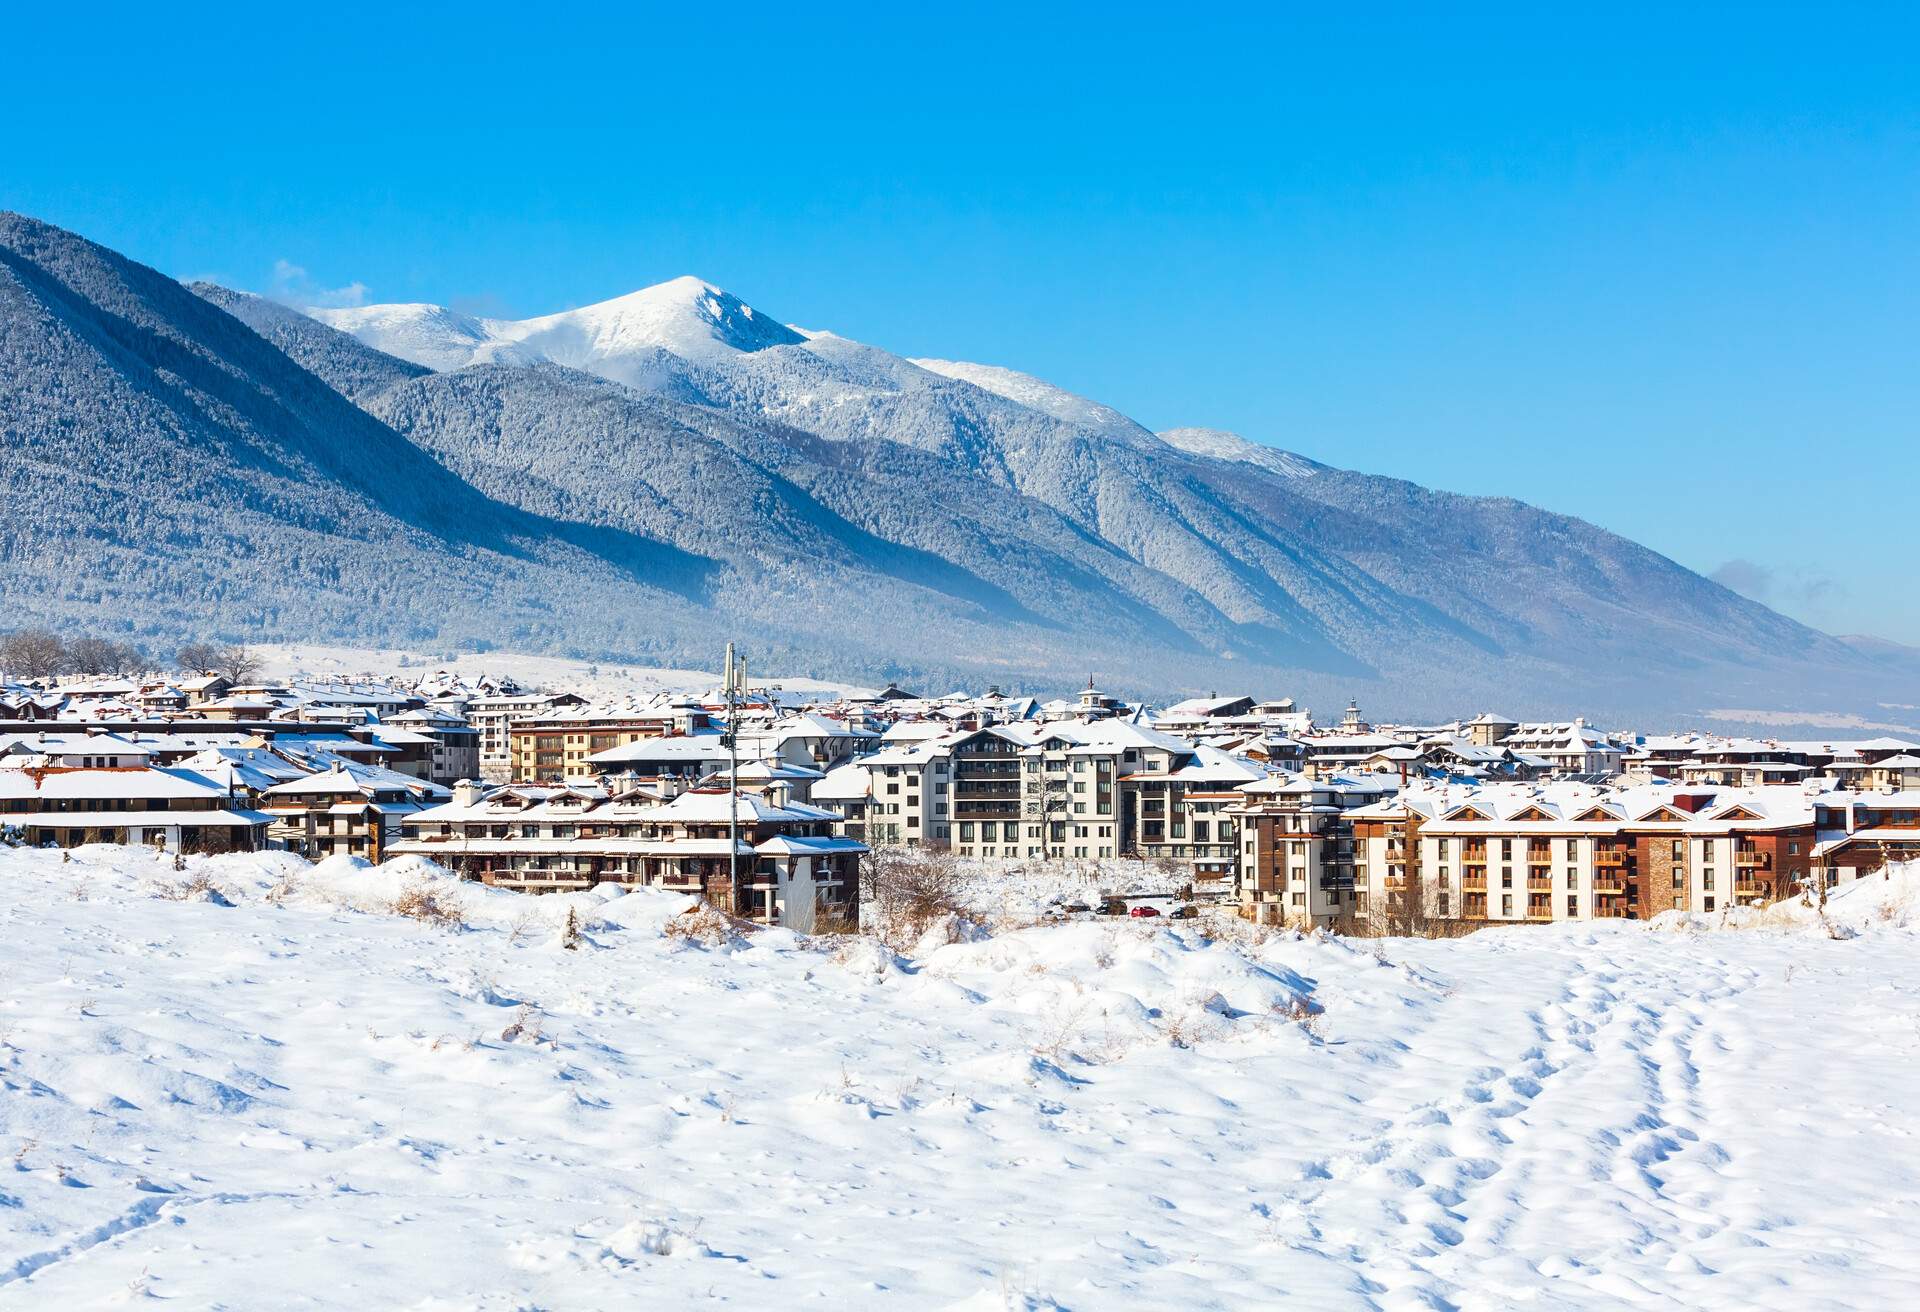 Buildings and residences along the base of a vast mountain range covered in snow.